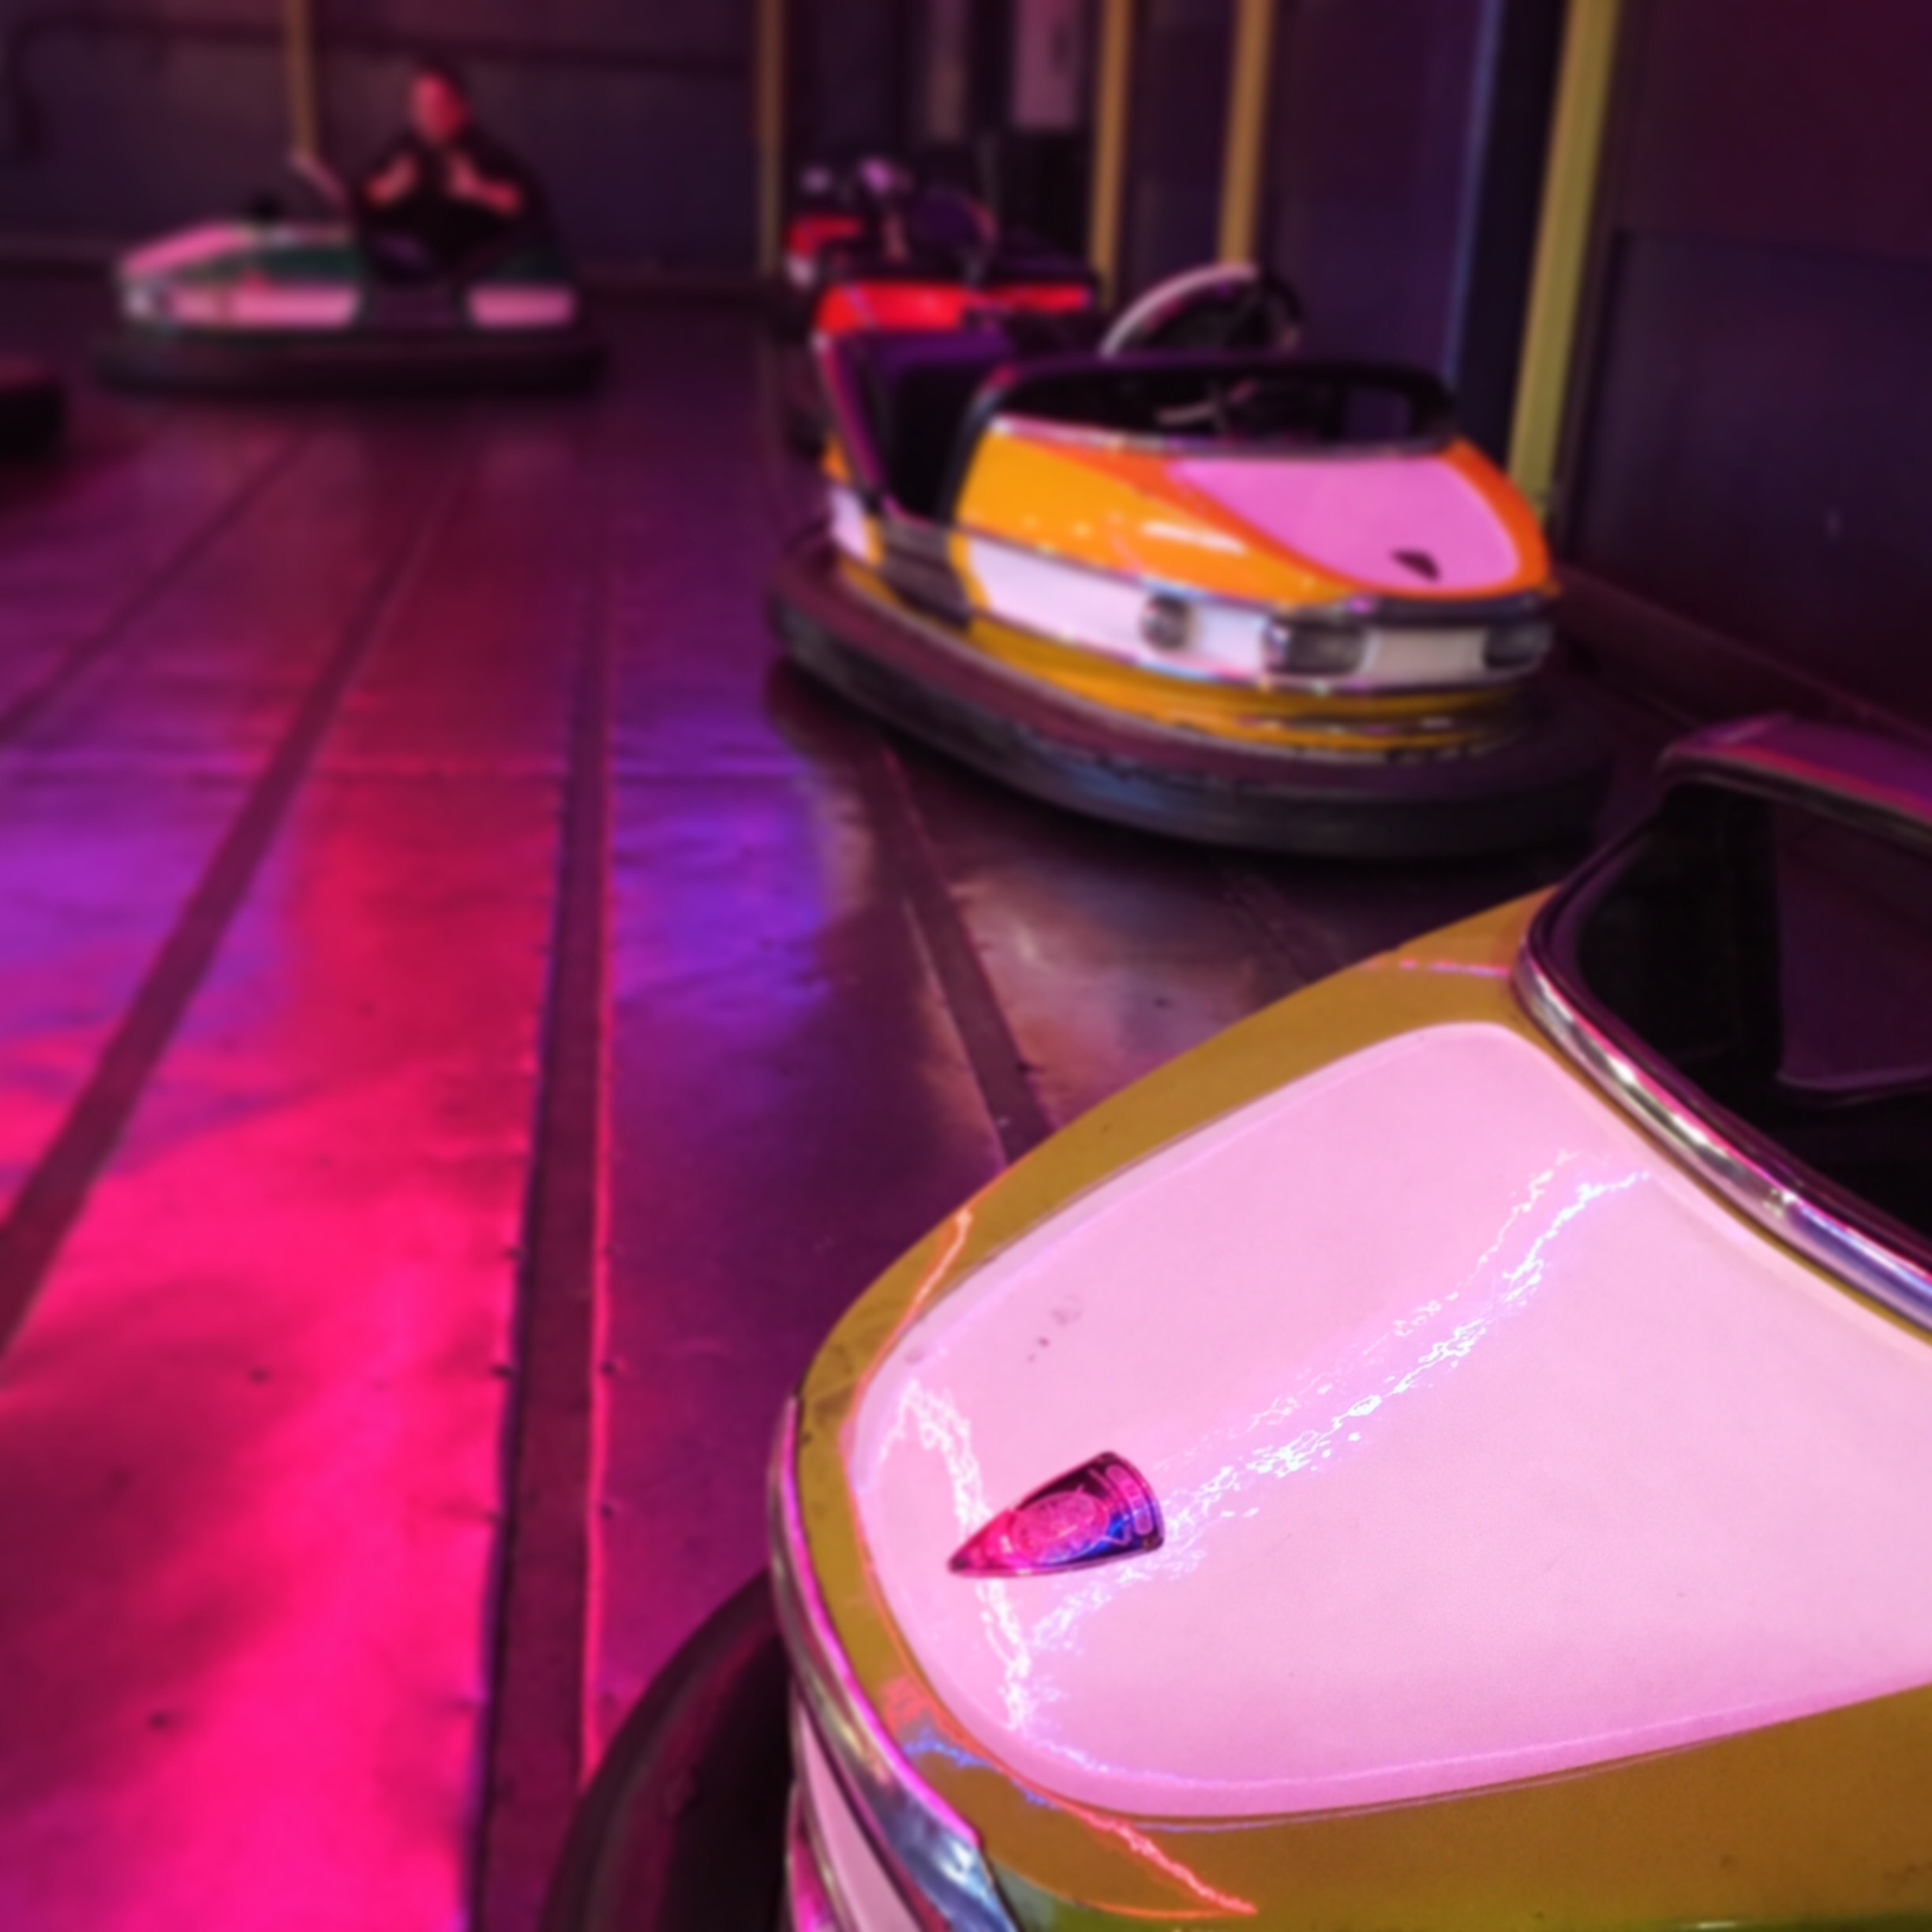 Possibly the funnest thing ever, bumper cars are the way to go at Family Fun Center. And there's hardly ever a line, even on weekends. #kidsfun